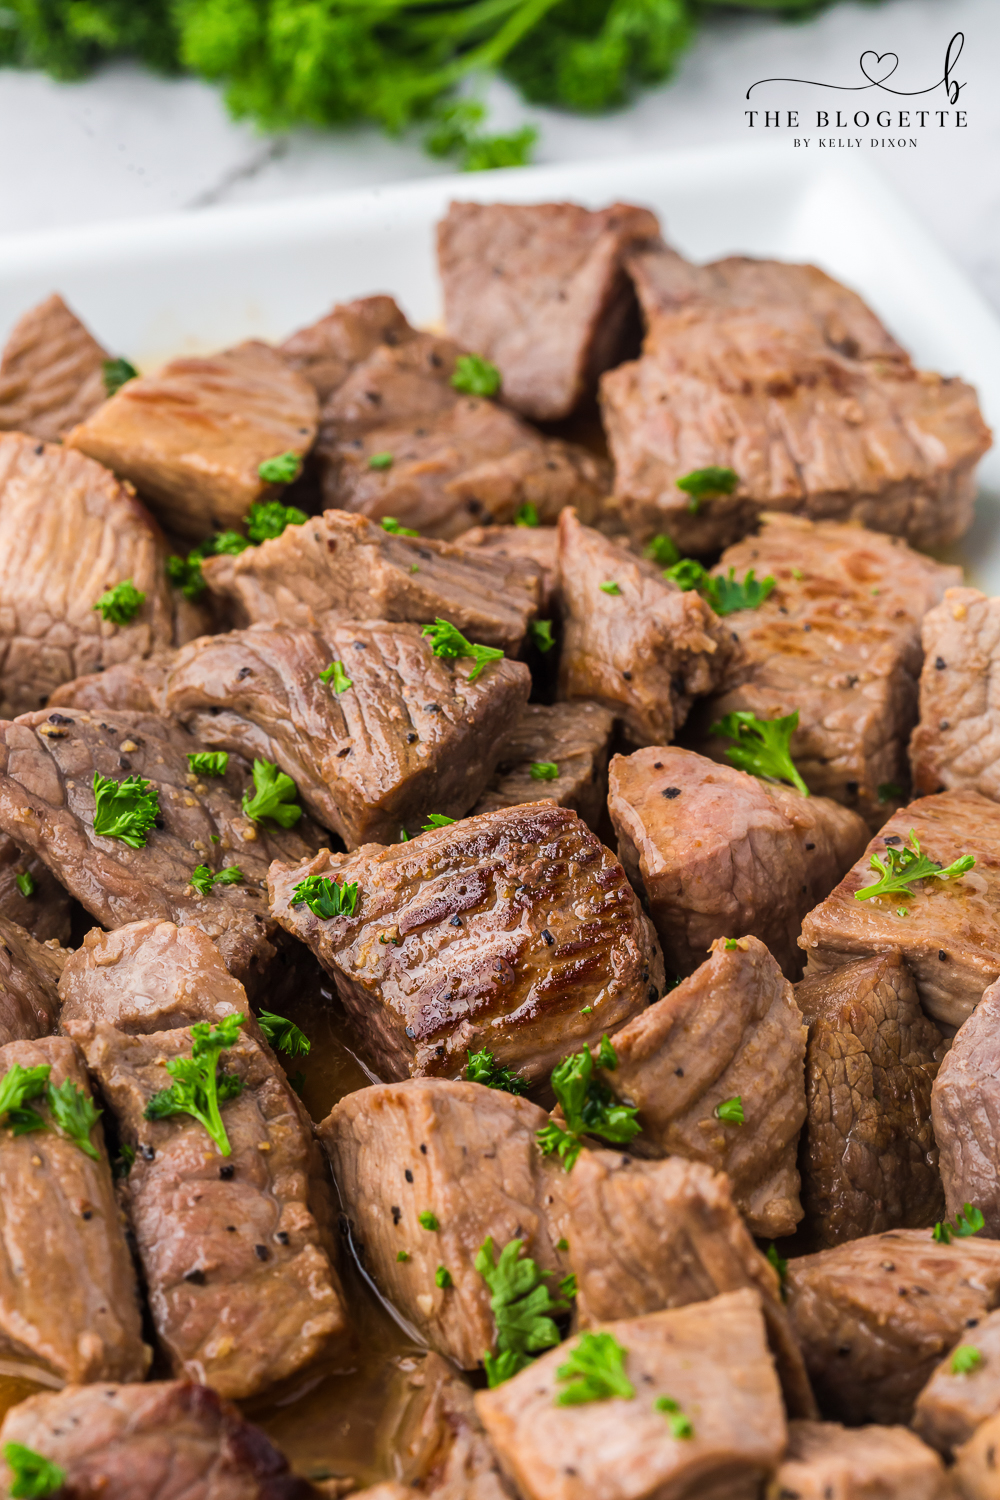 Garlic Butter Steak Bites are steak cubes cooked in a mouthwatering garlic butter sauce. Each juicy and tender bite leaves you wanting more!